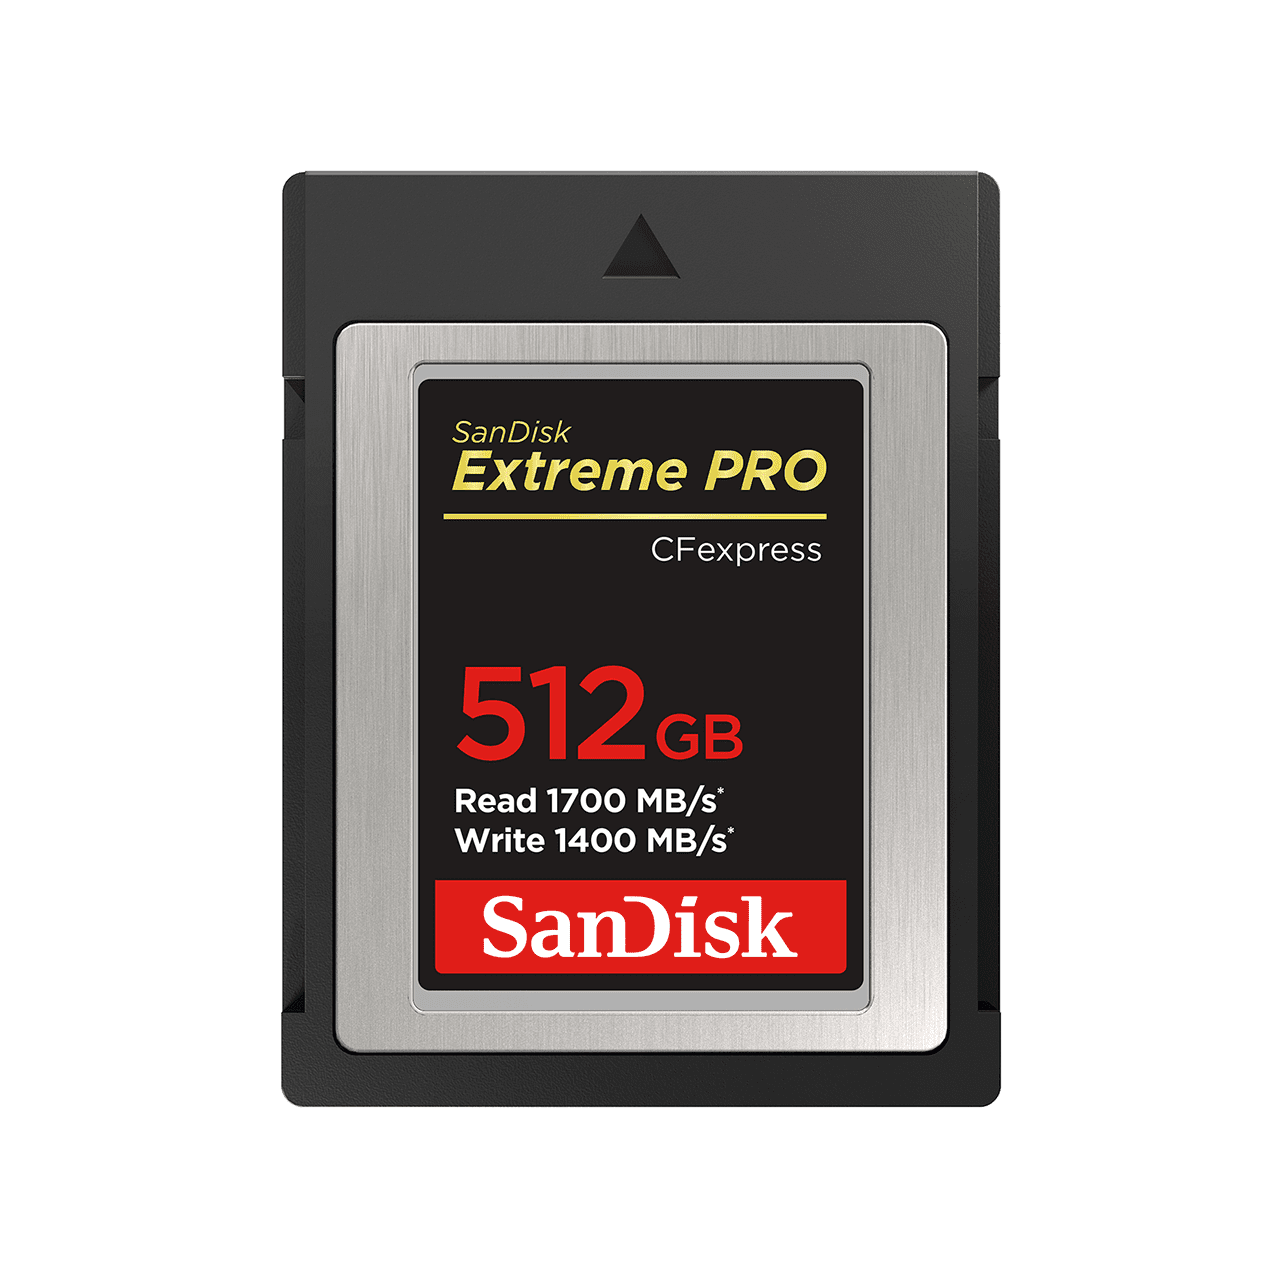 SanDisk Extreme Pro CFexpress Card Type B - 512GB 最新價錢及購物 